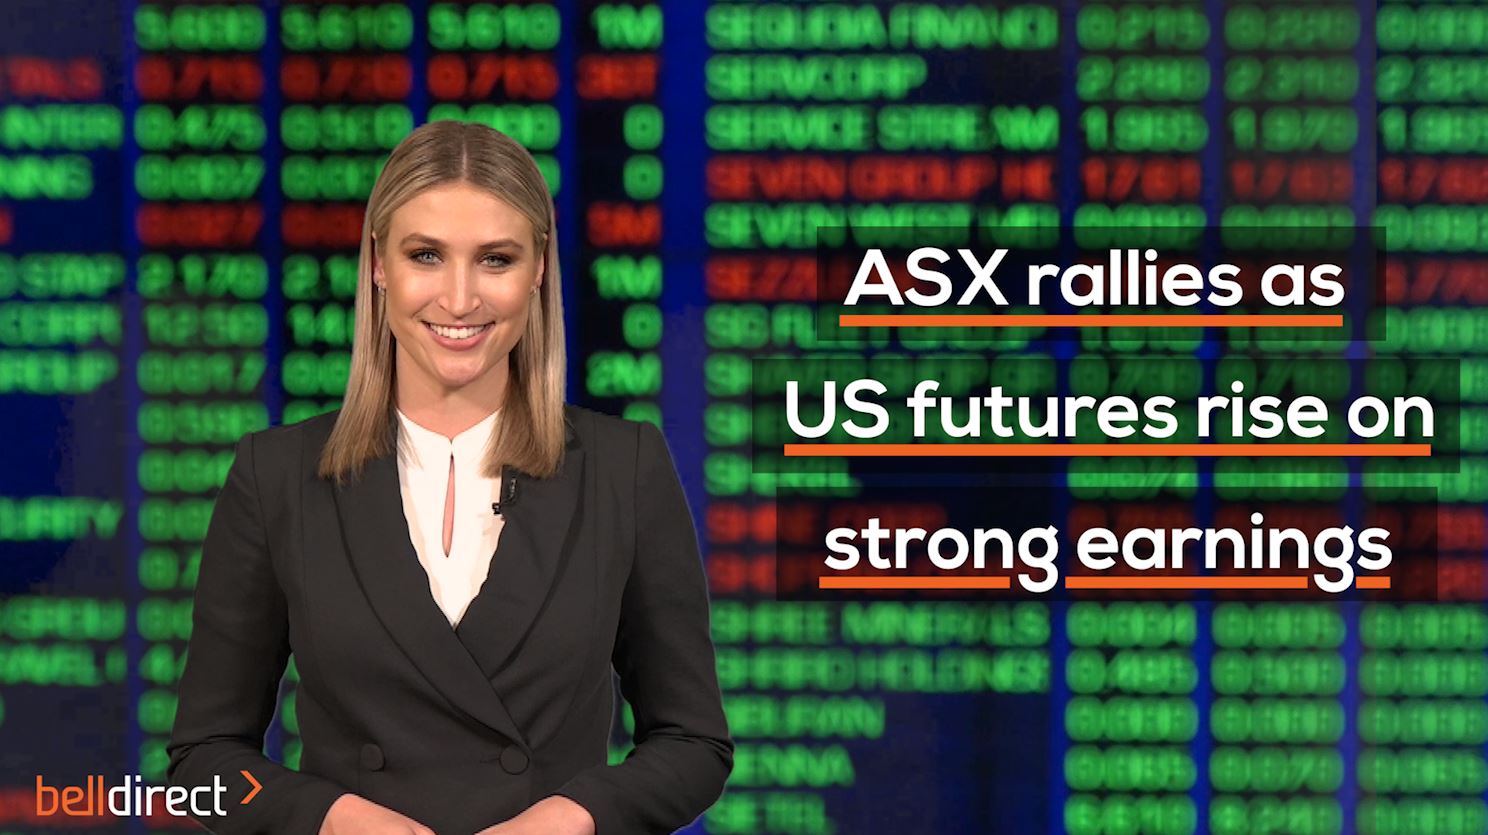 ASX rallies as US futures rise on strong earnings